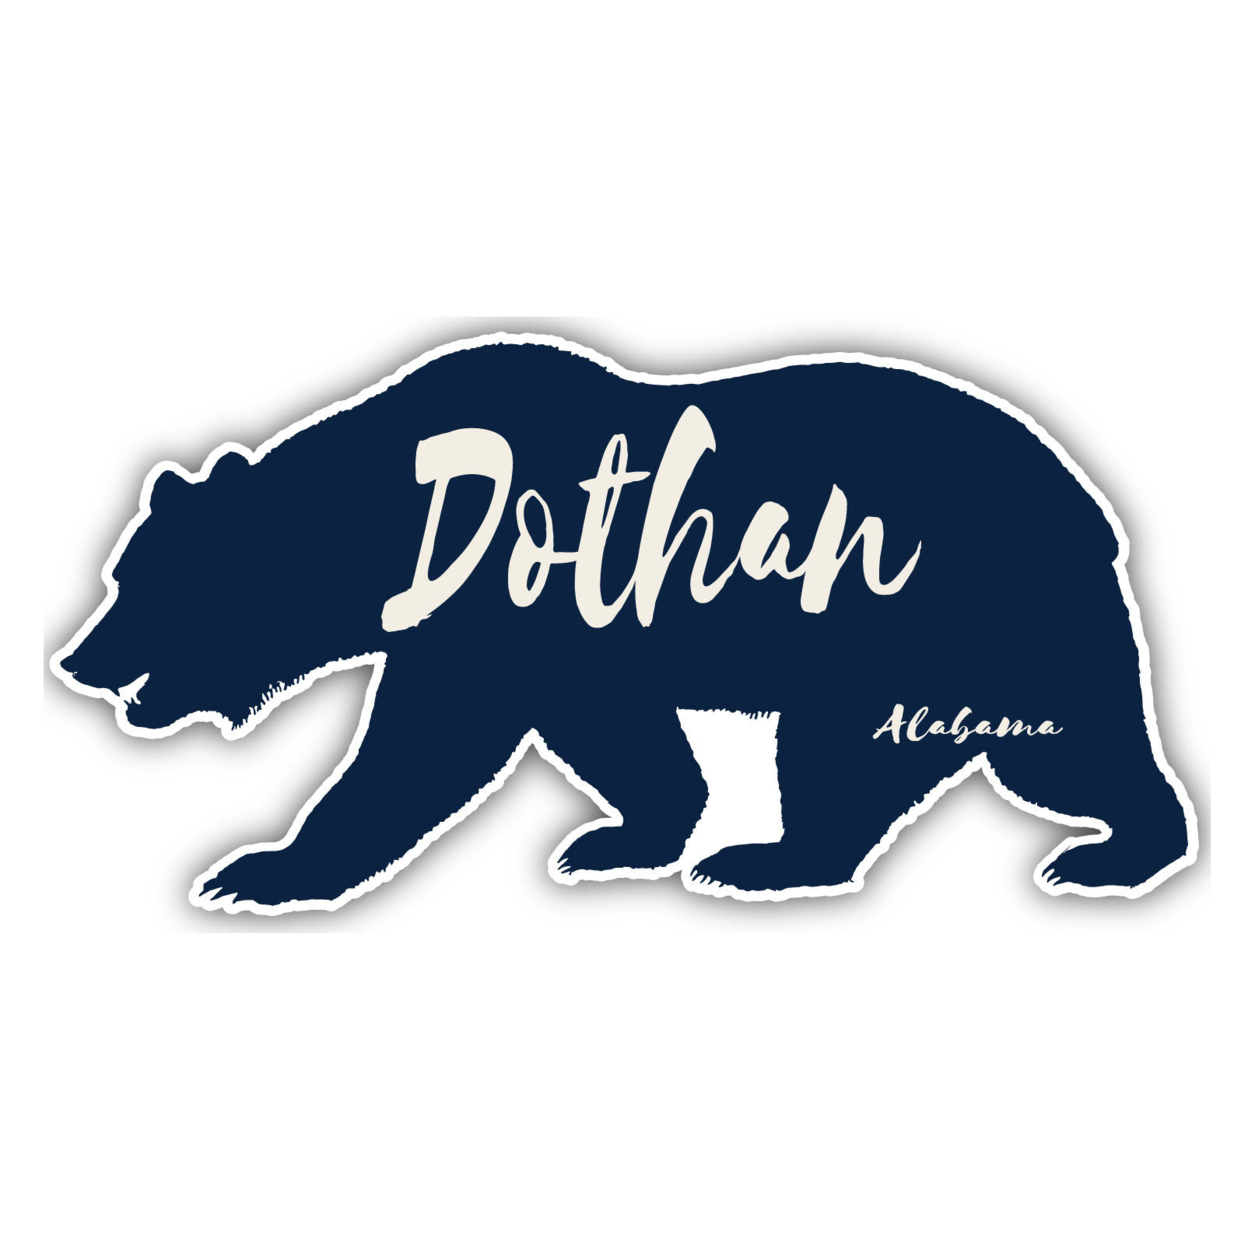 Dothan Alabama Souvenir Decorative Stickers (Choose Theme And Size) - 4-Pack, 2-Inch, Camp Life